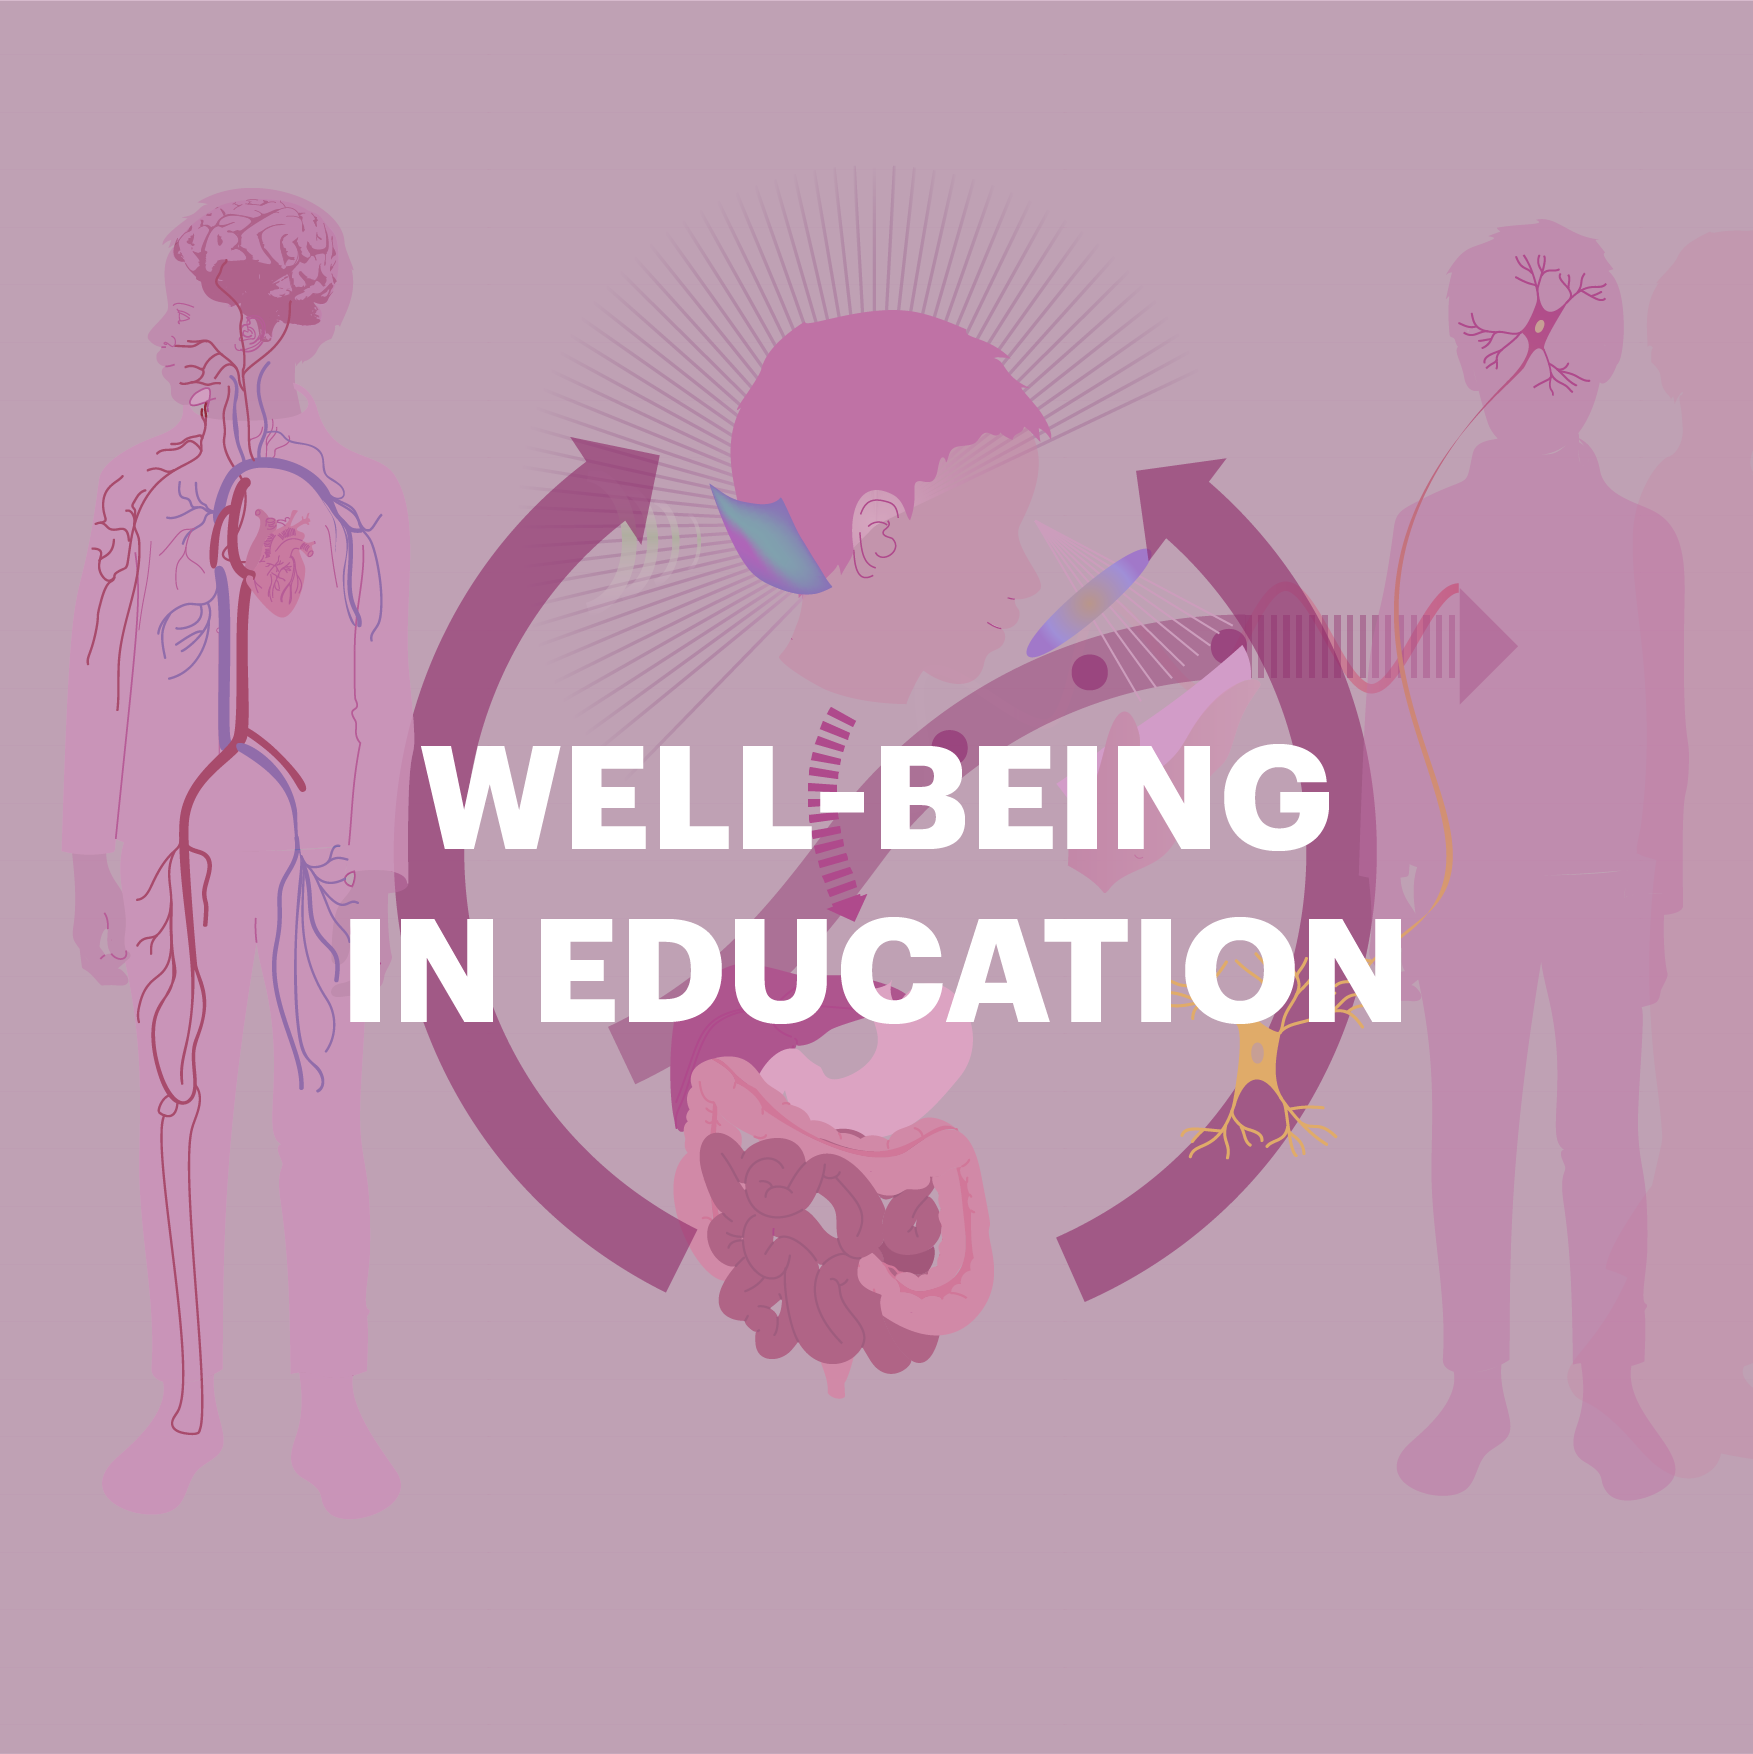 What if we positioned well-being at the centre of our education system — investing in the tools and infrastructures for individual and collective care through schools and the wider community?